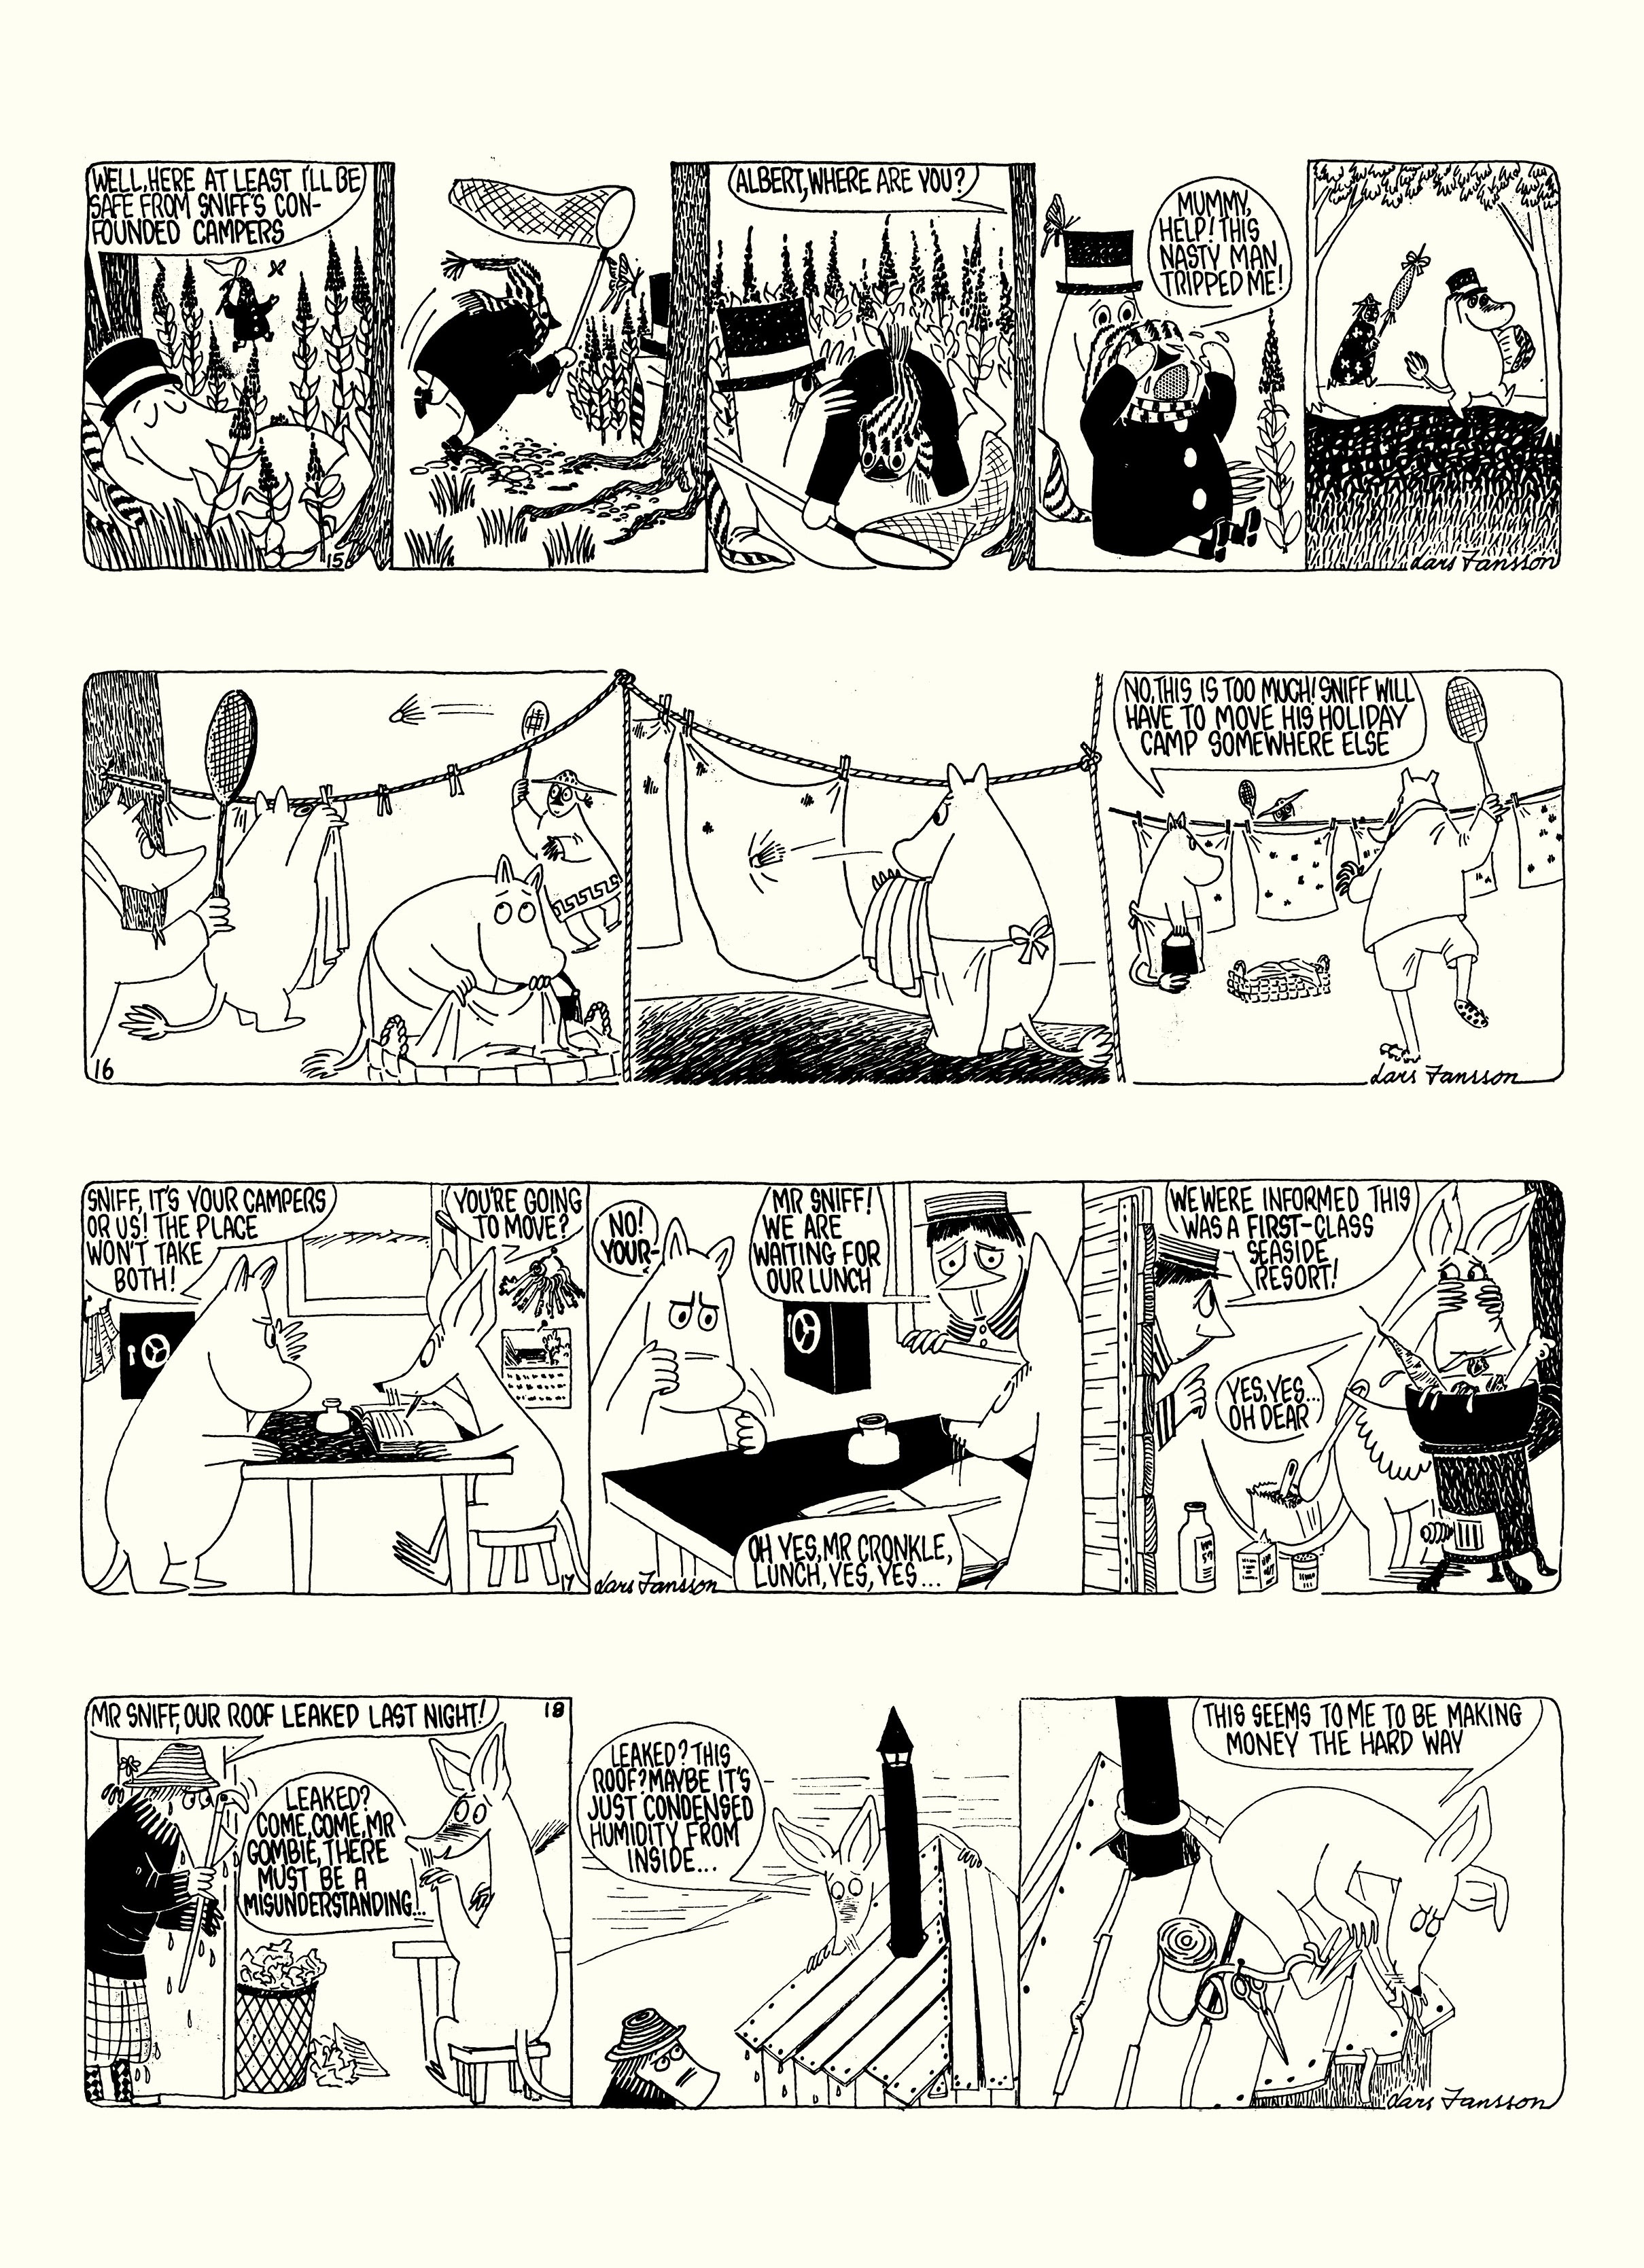 Read online Moomin: The Complete Lars Jansson Comic Strip comic -  Issue # TPB 8 - 55